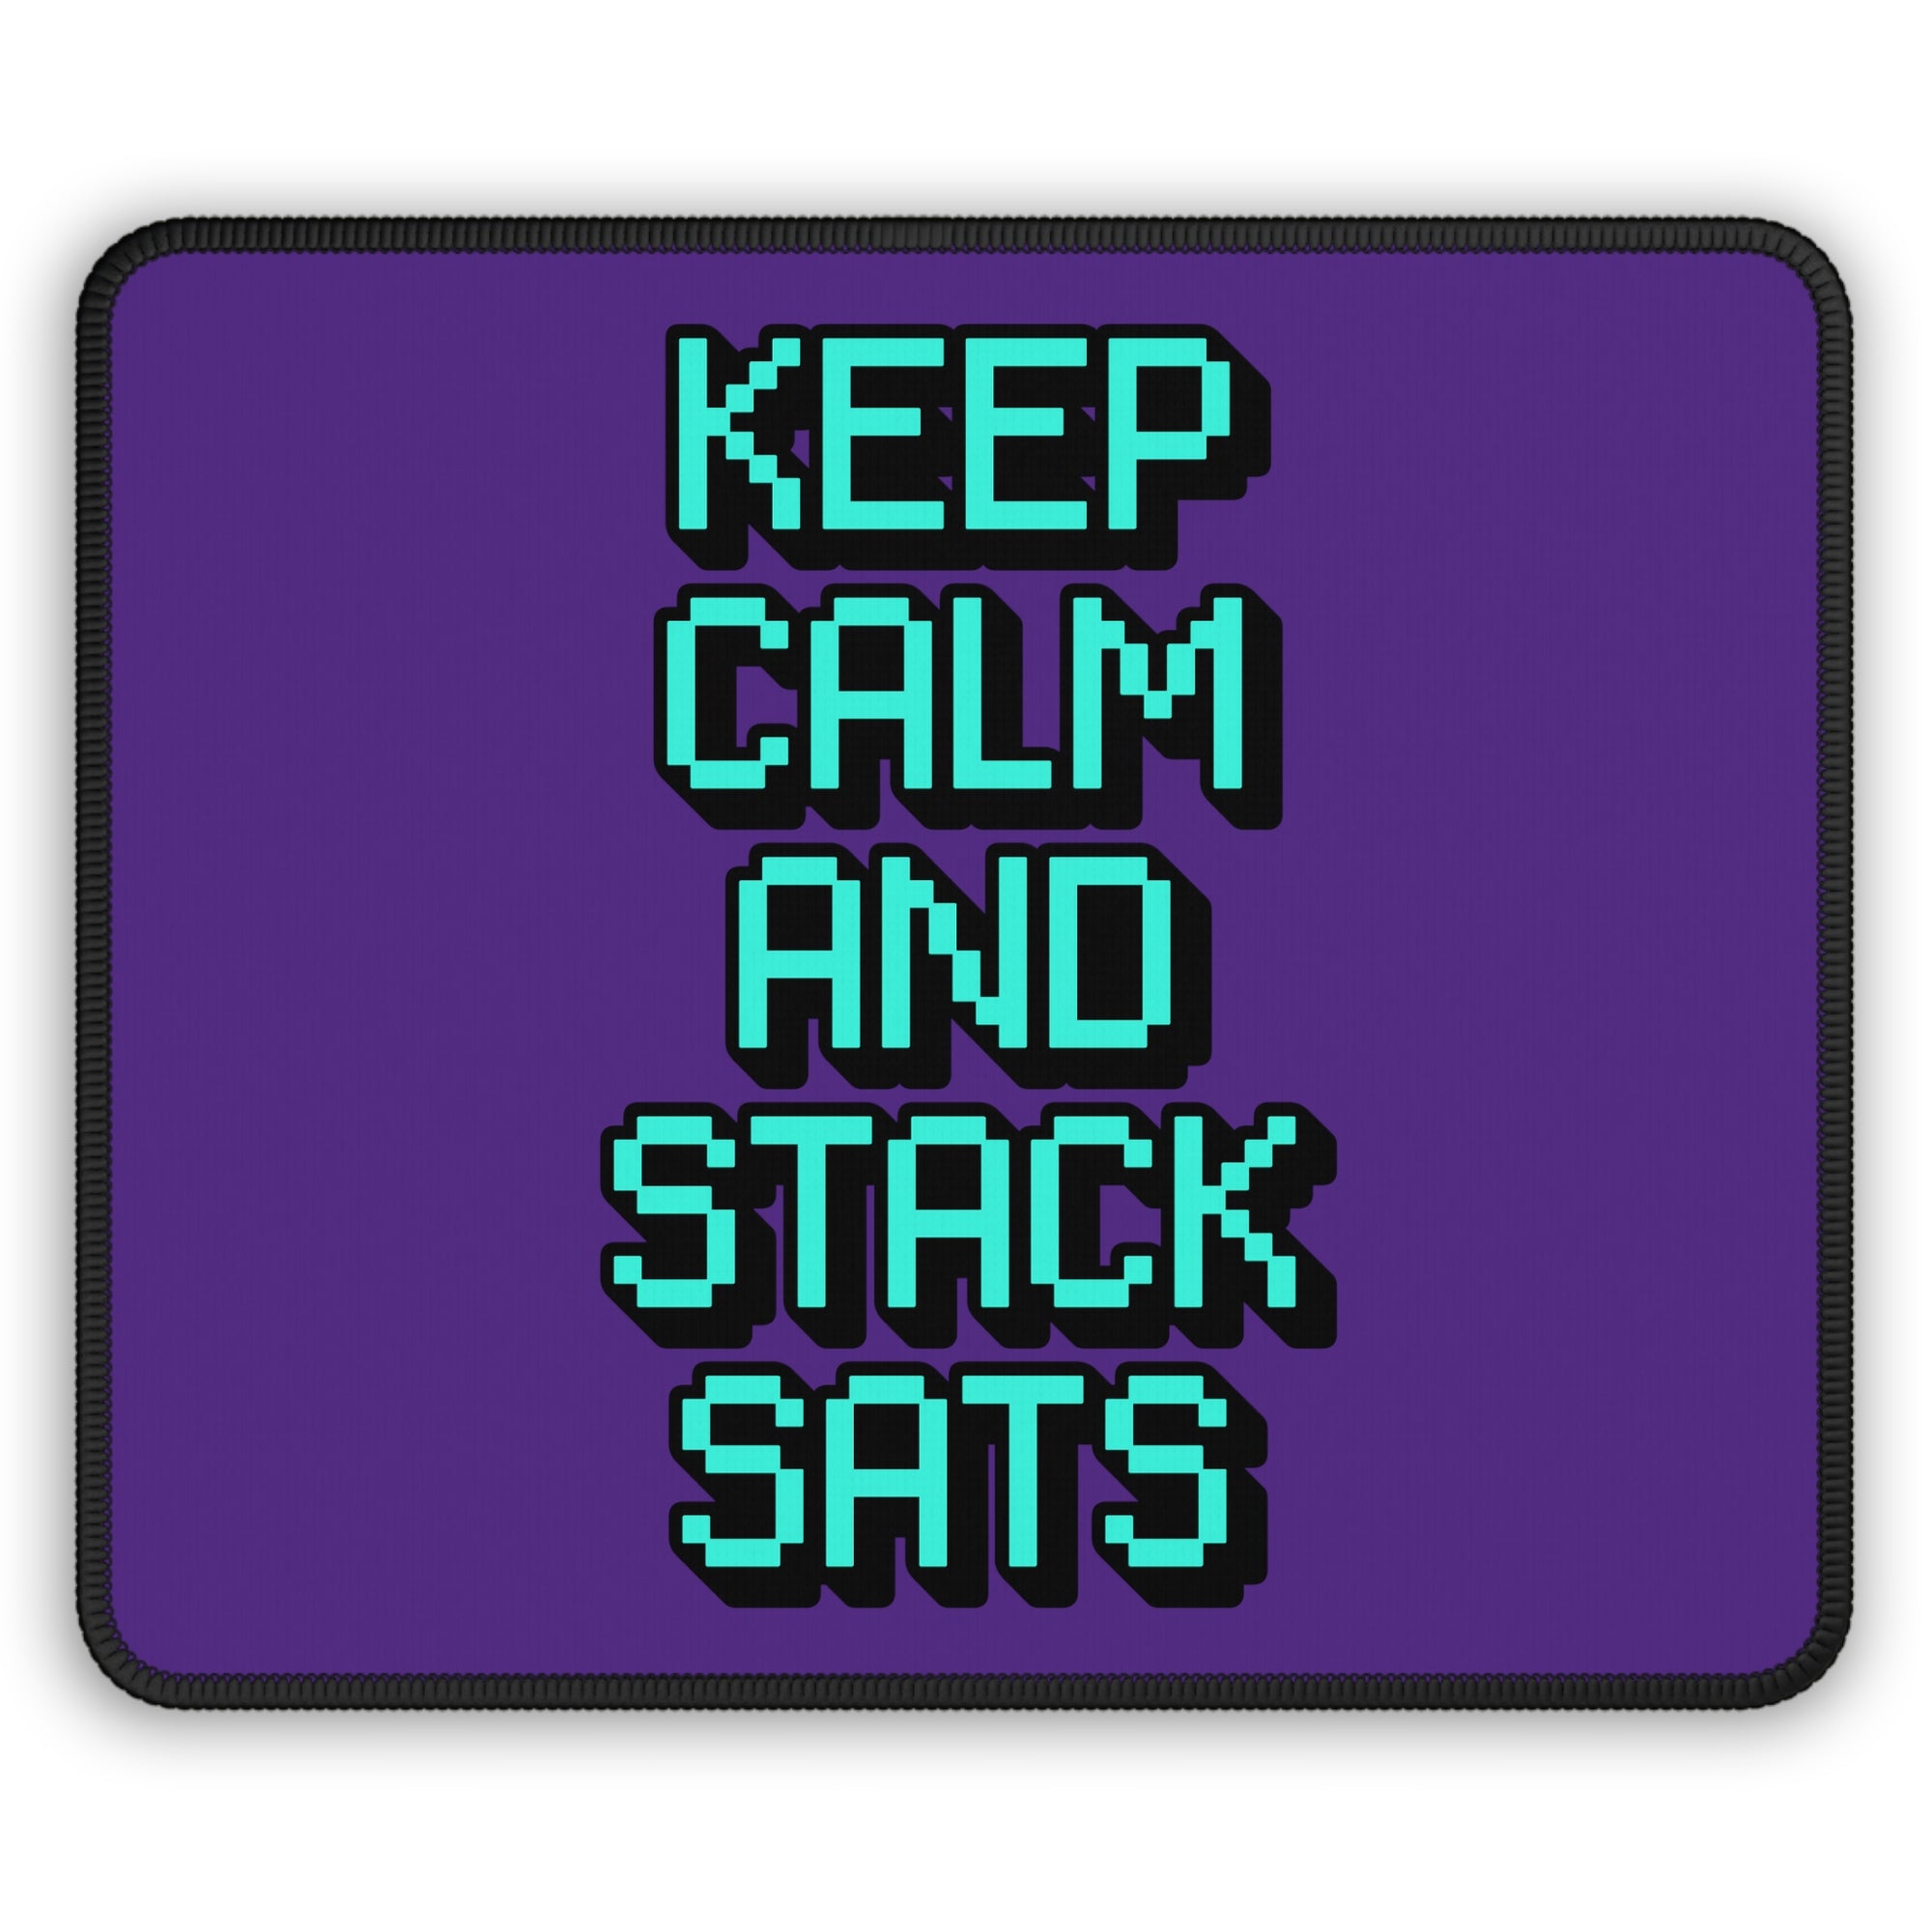 Bitcoin Merchandise - Keep Calm And Stack Sats Mouse Pad. Close Up View.